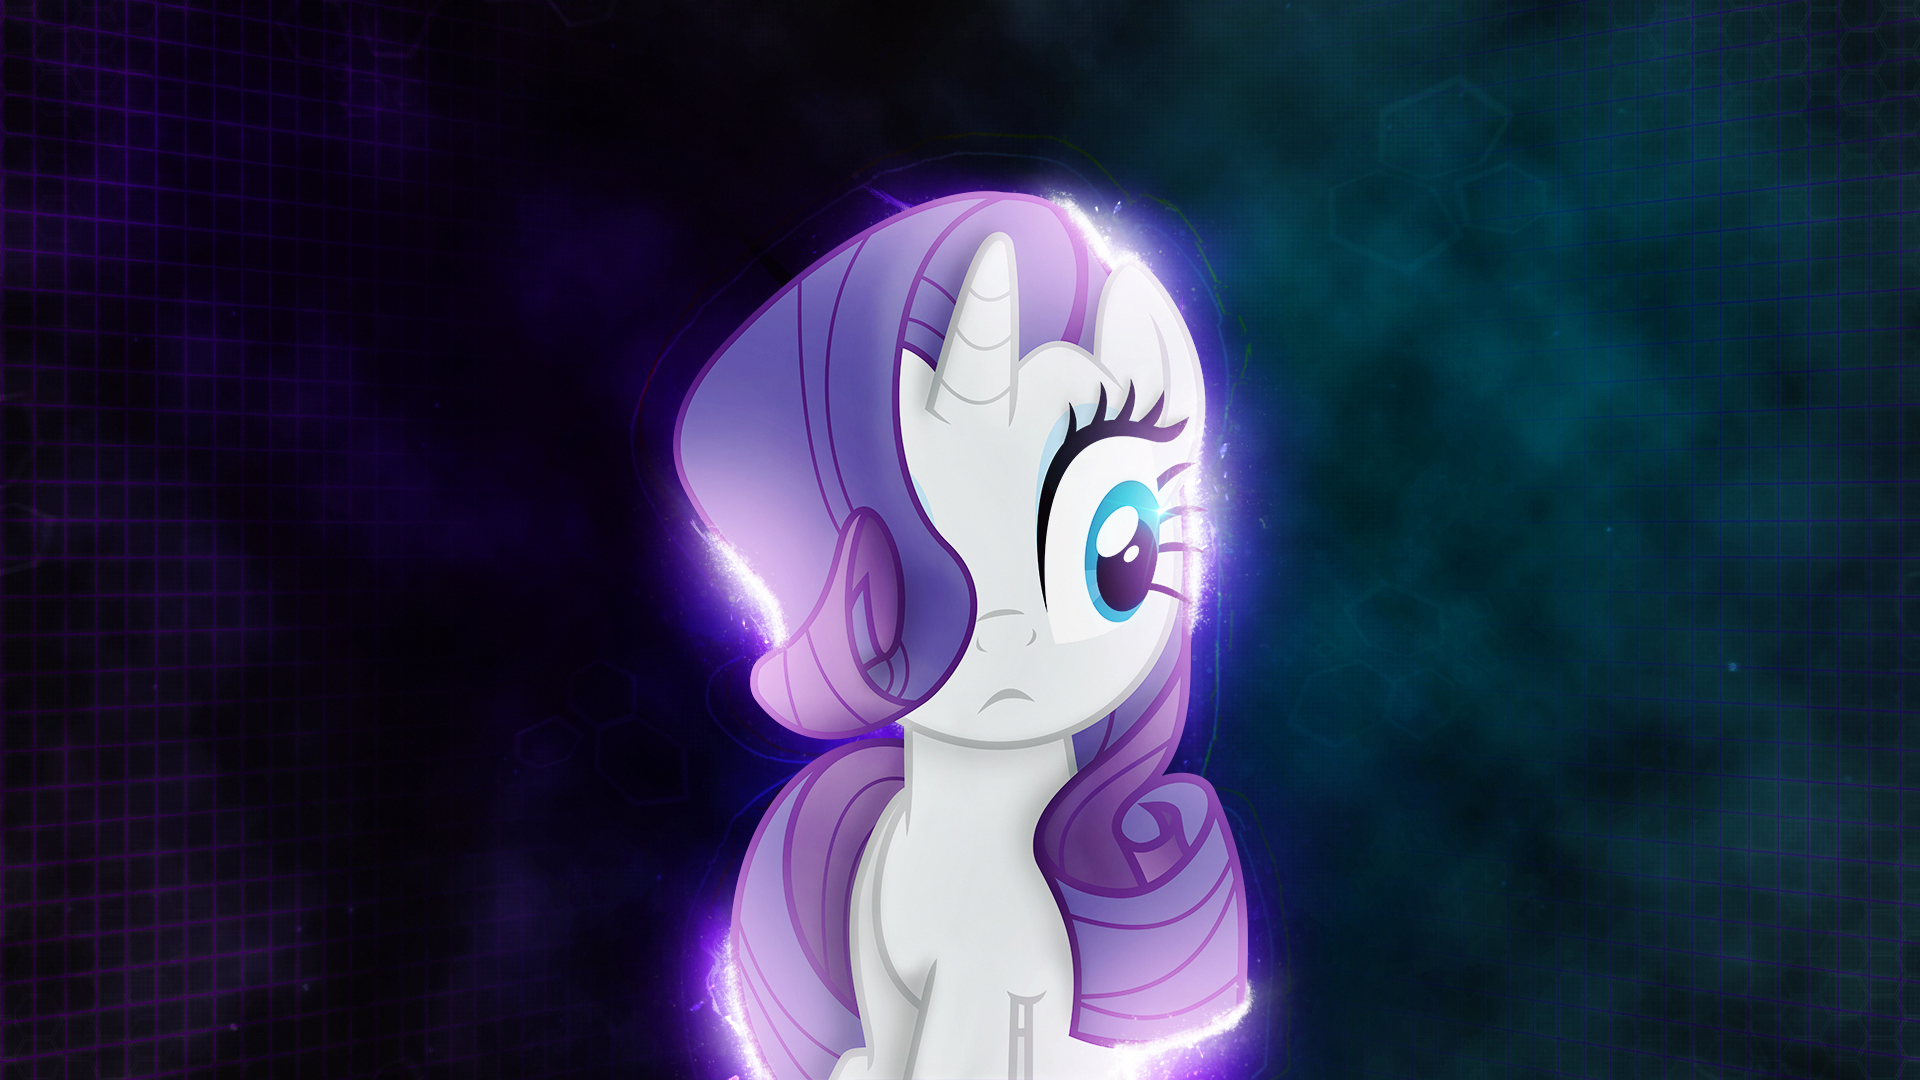 Wallpaper ~ Rarity. by Mackaged and VladimirMacHolzraum